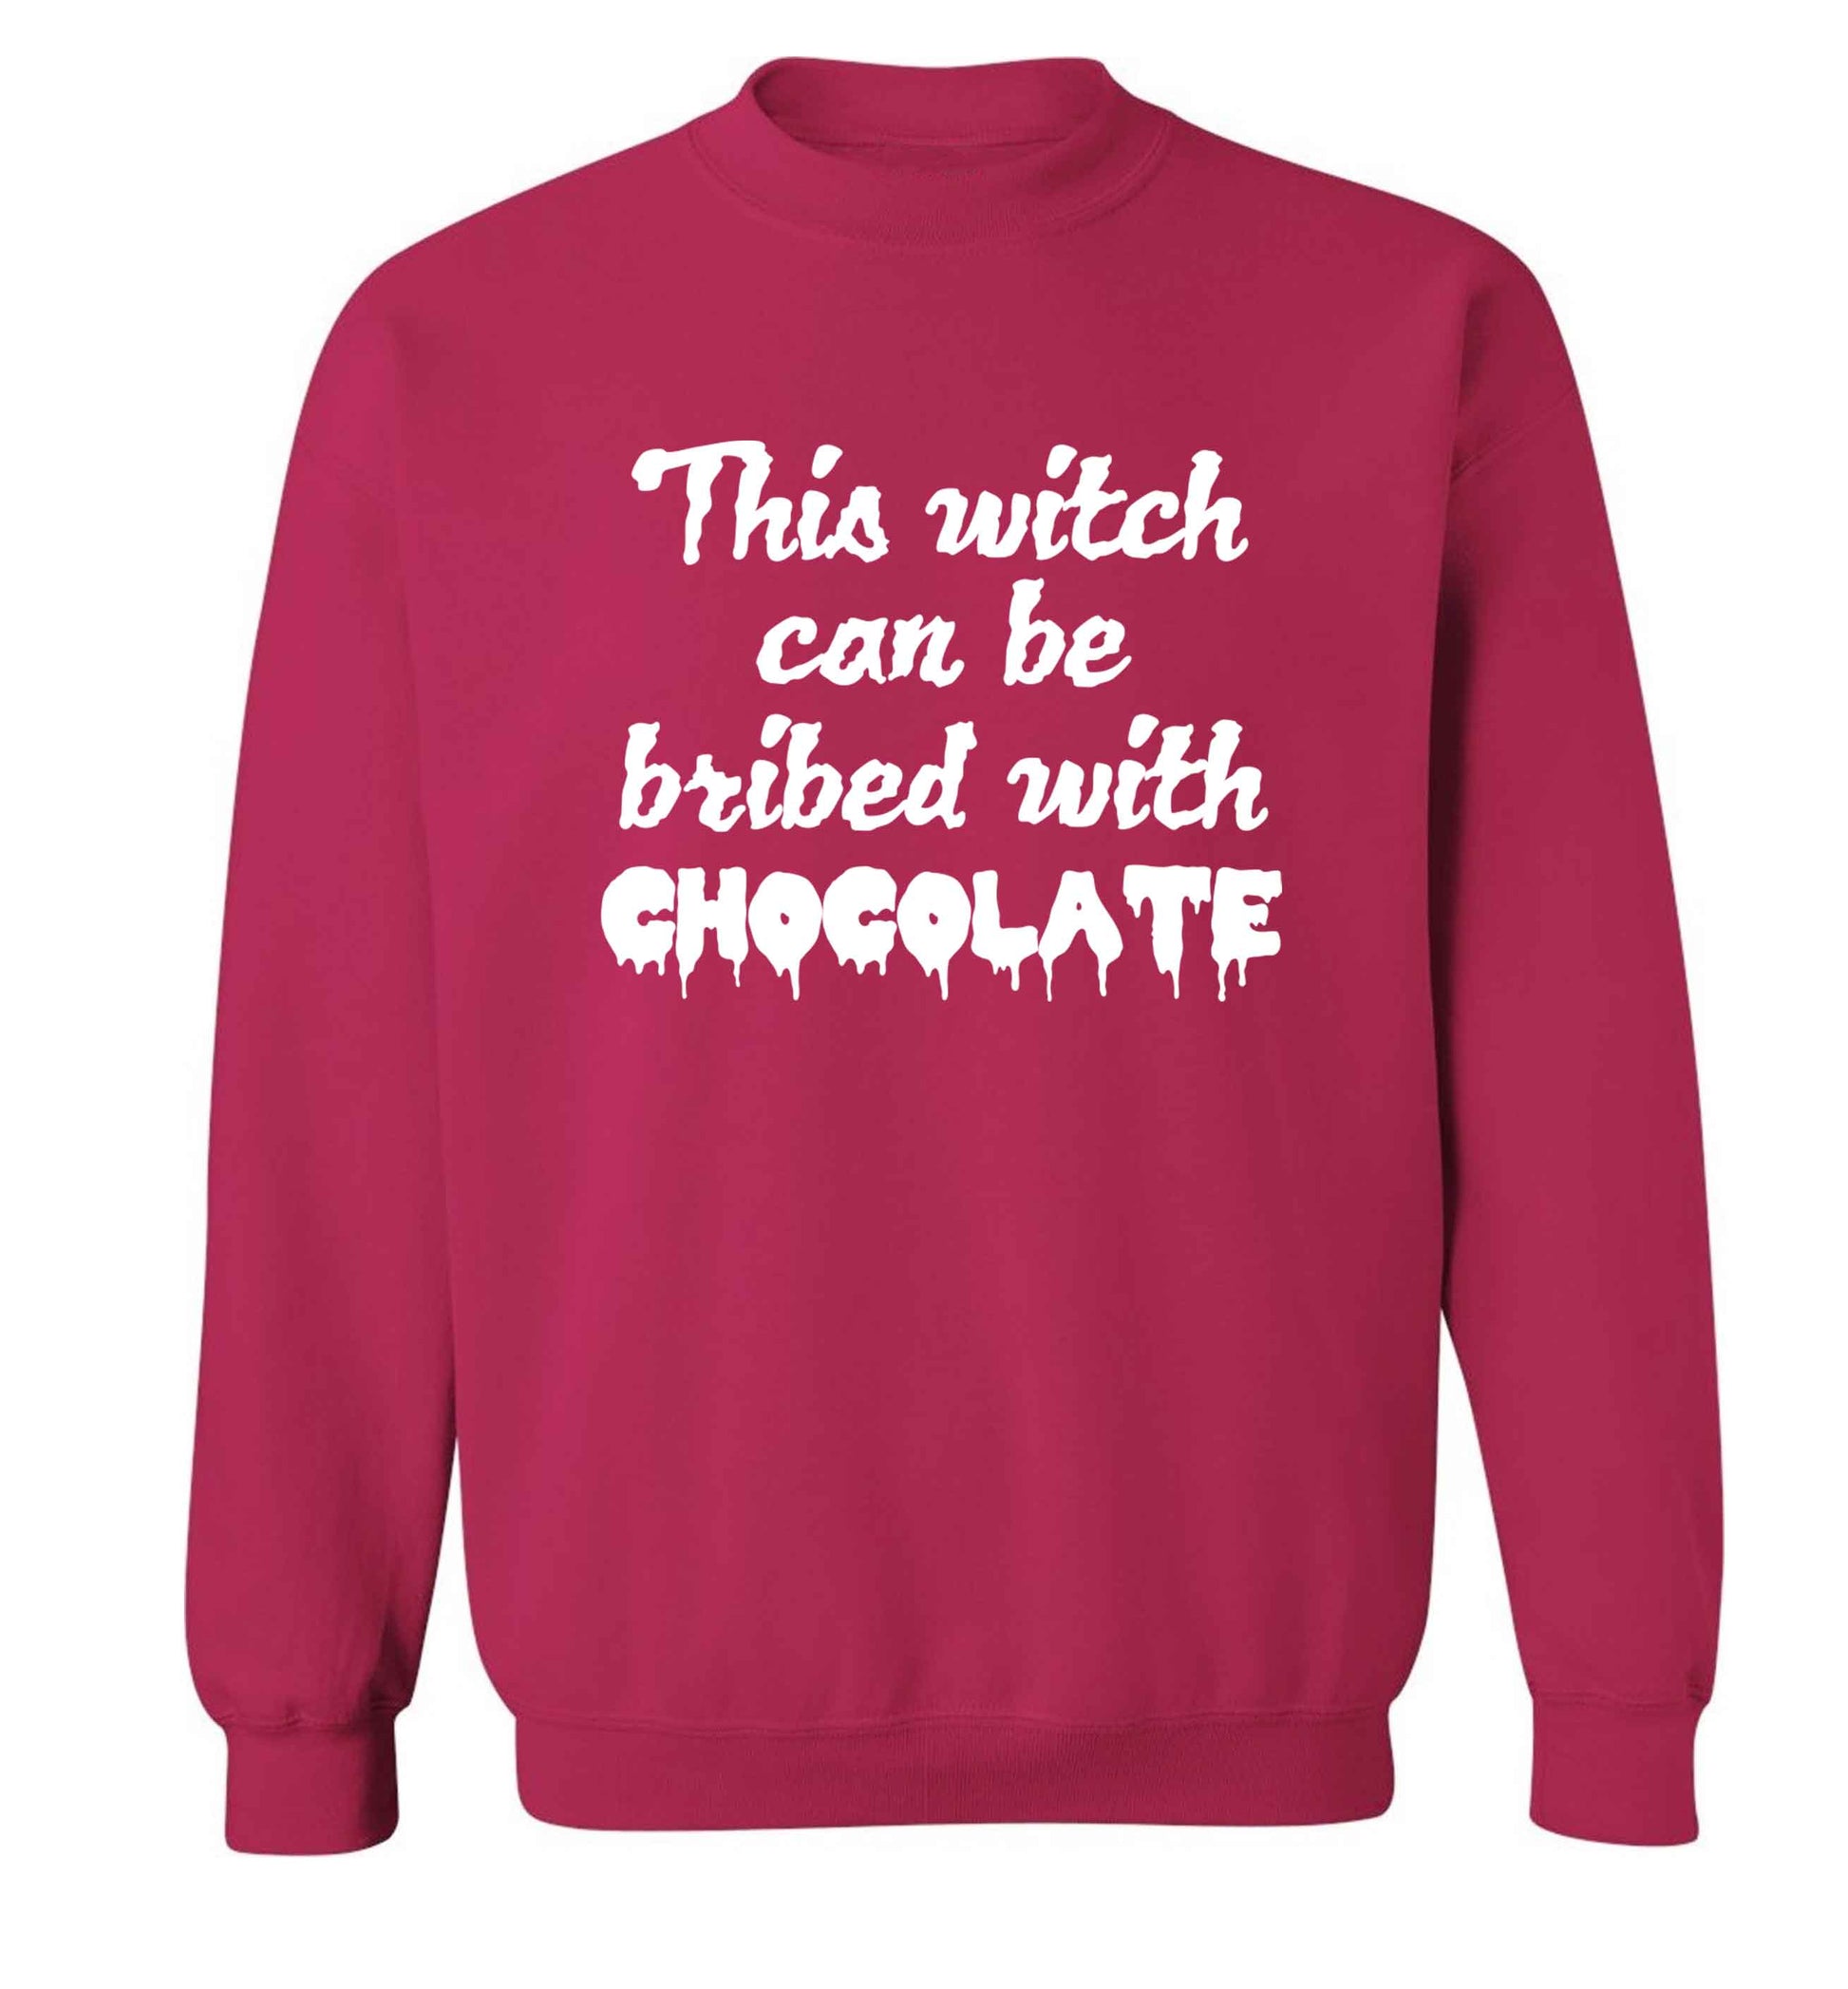 This witch can be bribed with chocolate adult's unisex pink sweater 2XL